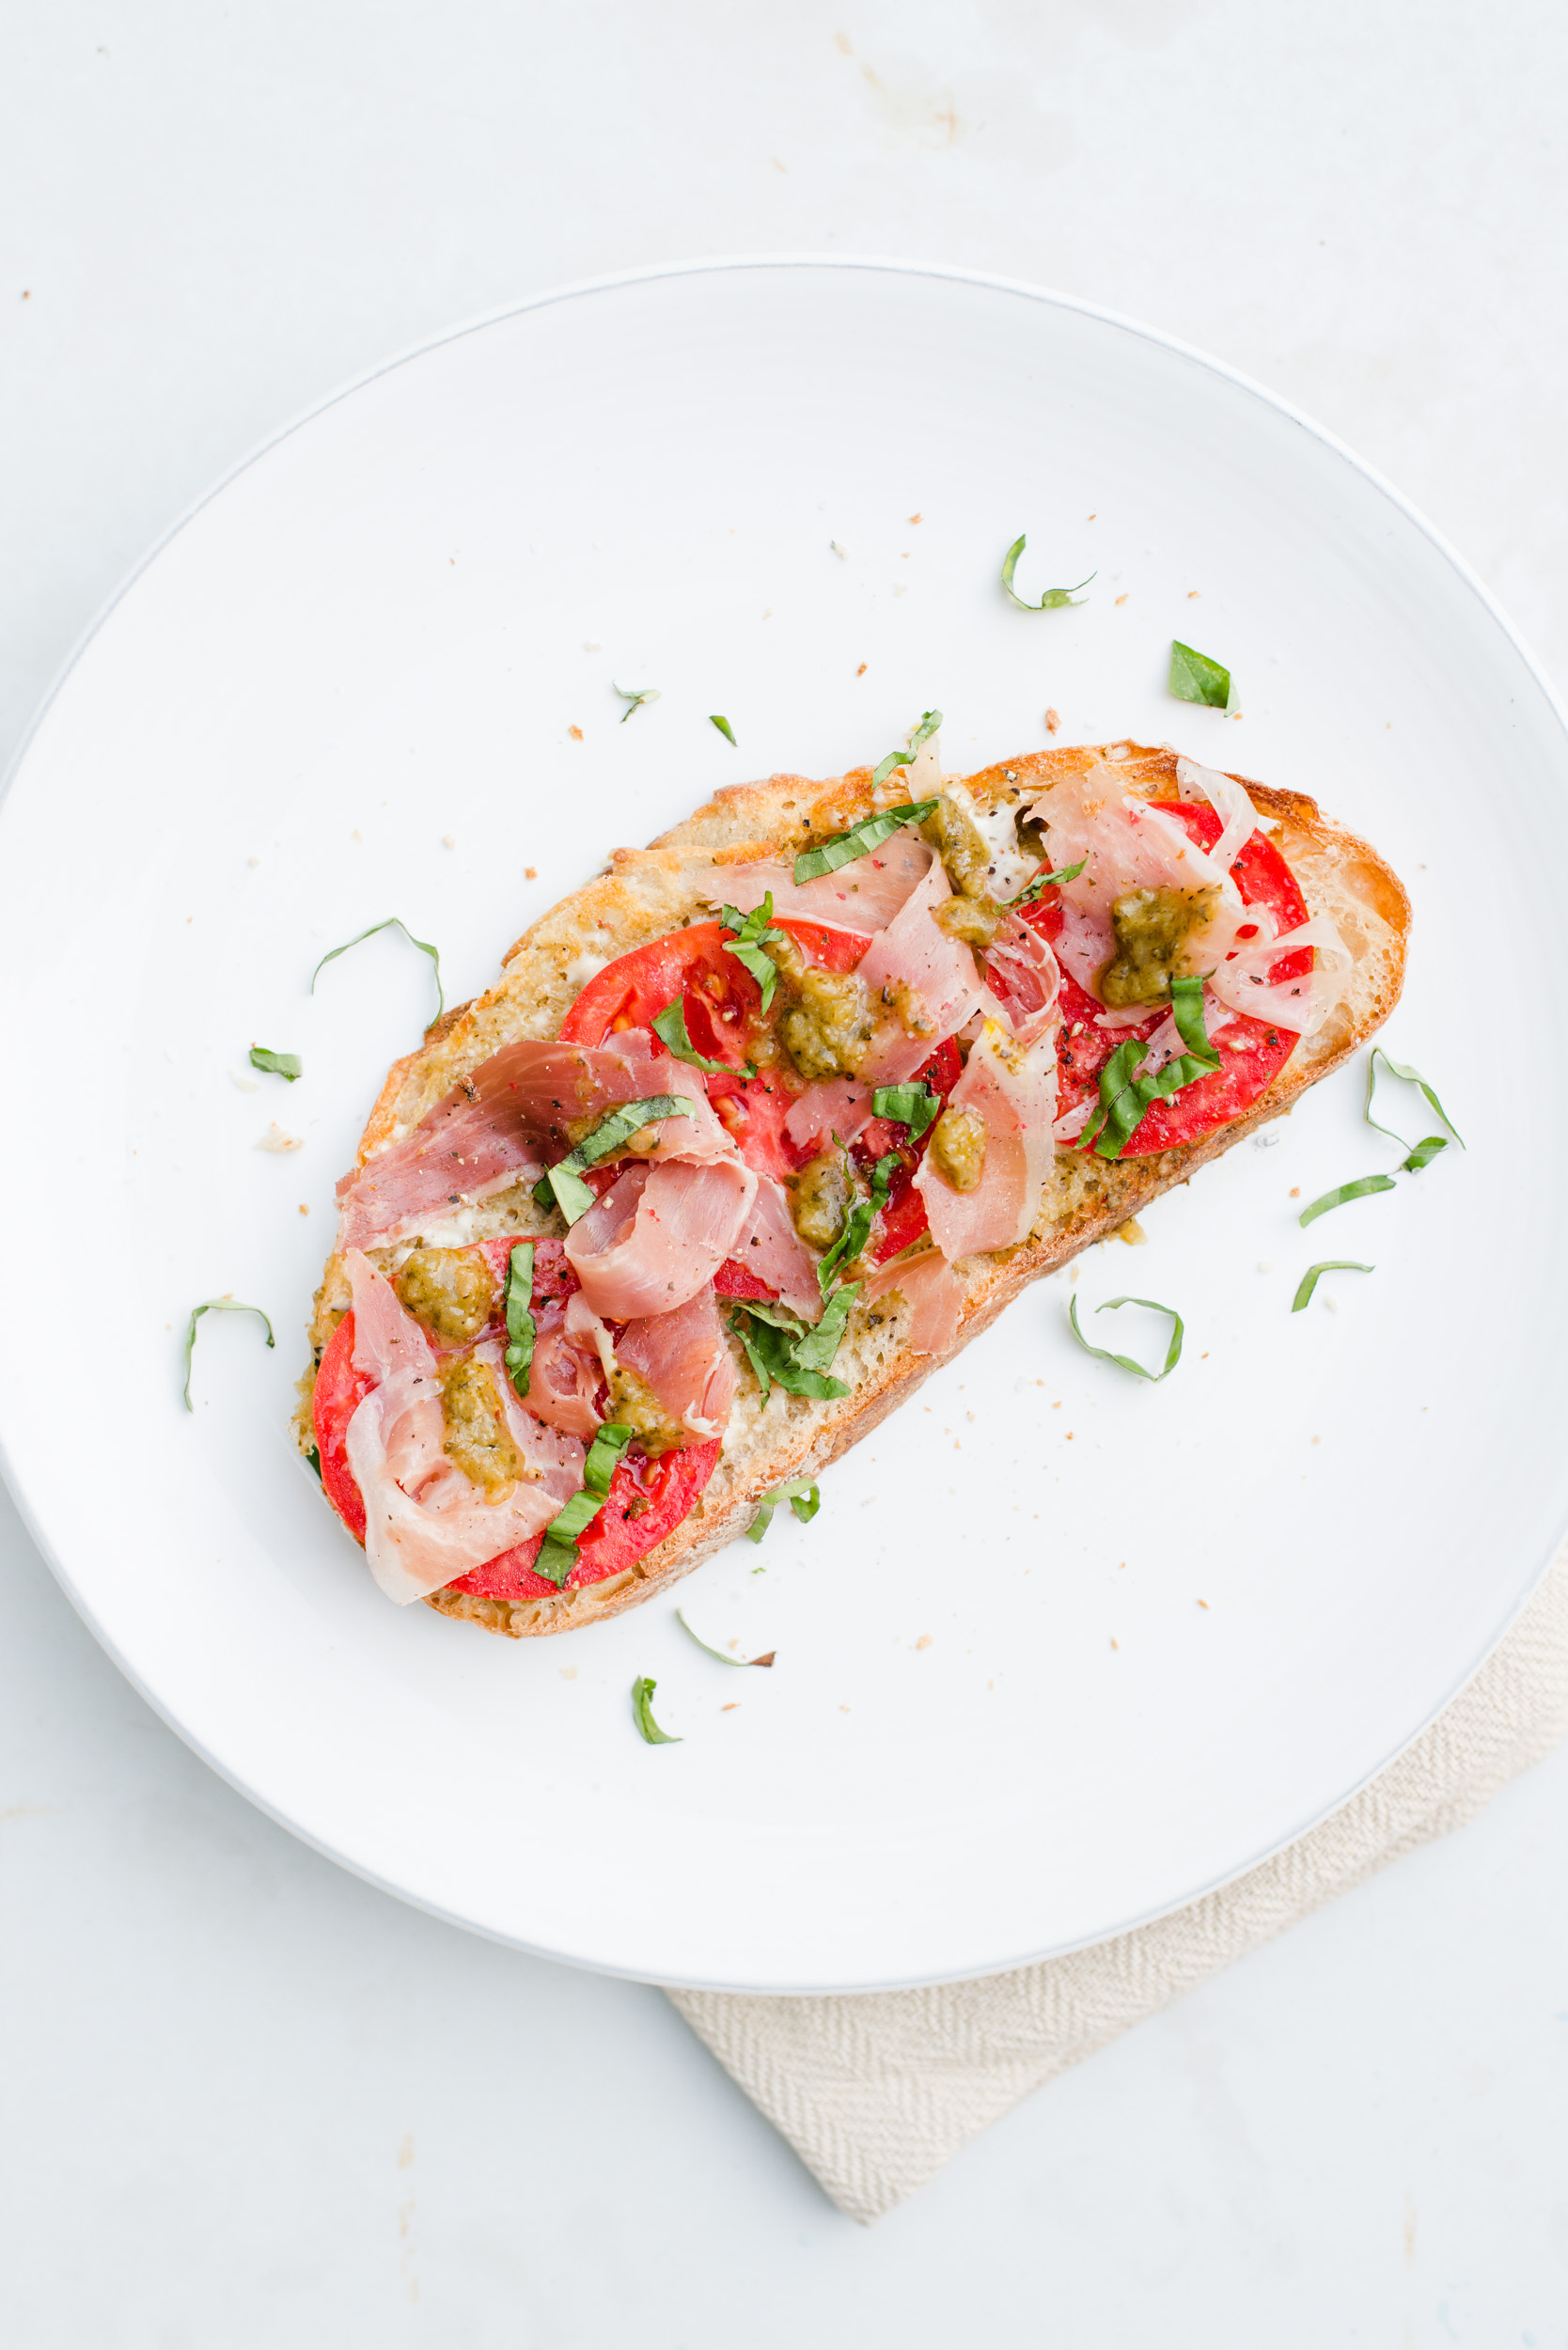 Tomato, Pesto, & Prosciutto Toast - The best way to use up freshly picked tomatoes!